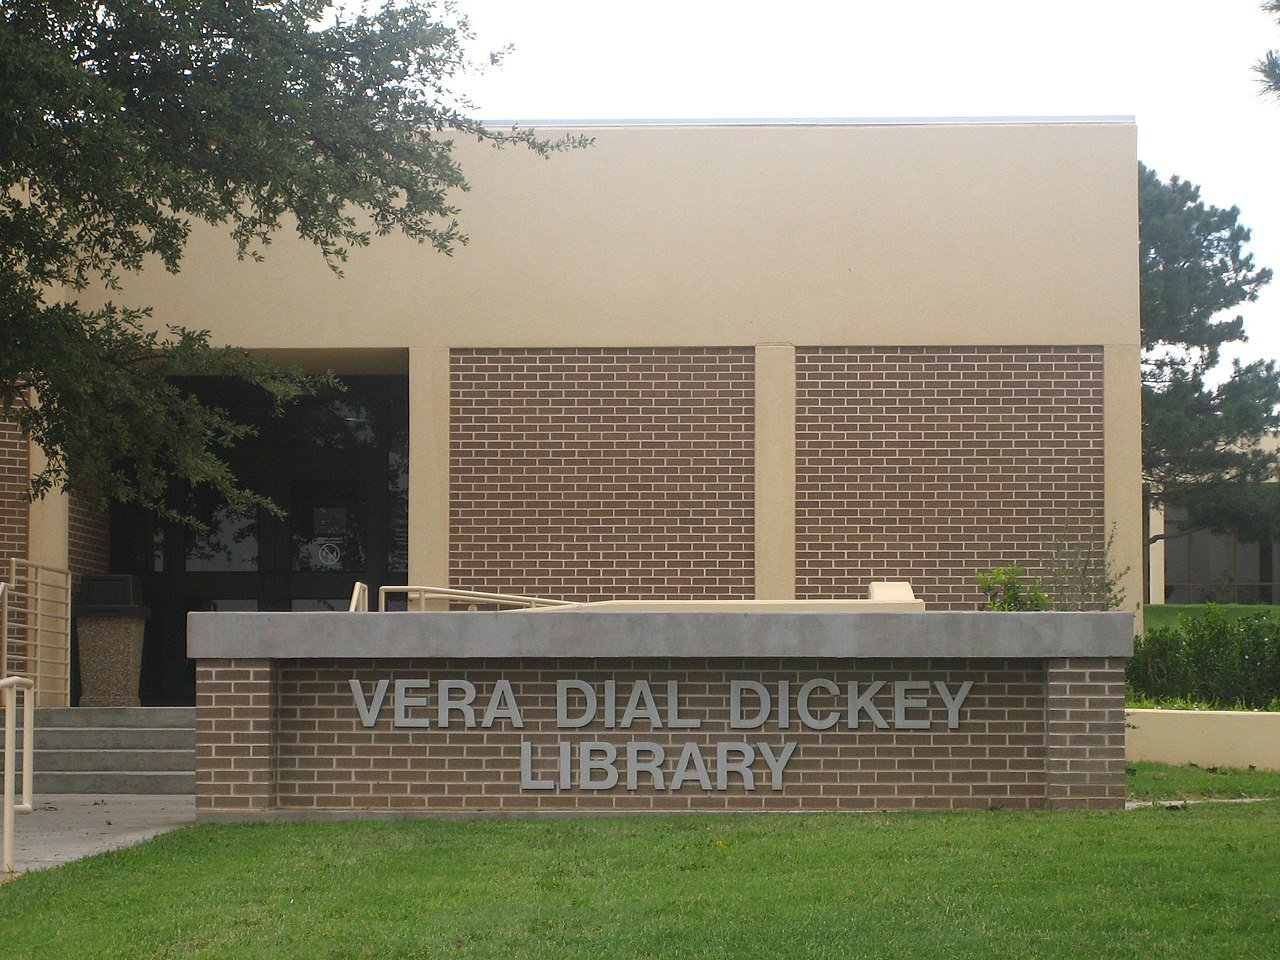 Photo of the Vera Dial Dickey Library